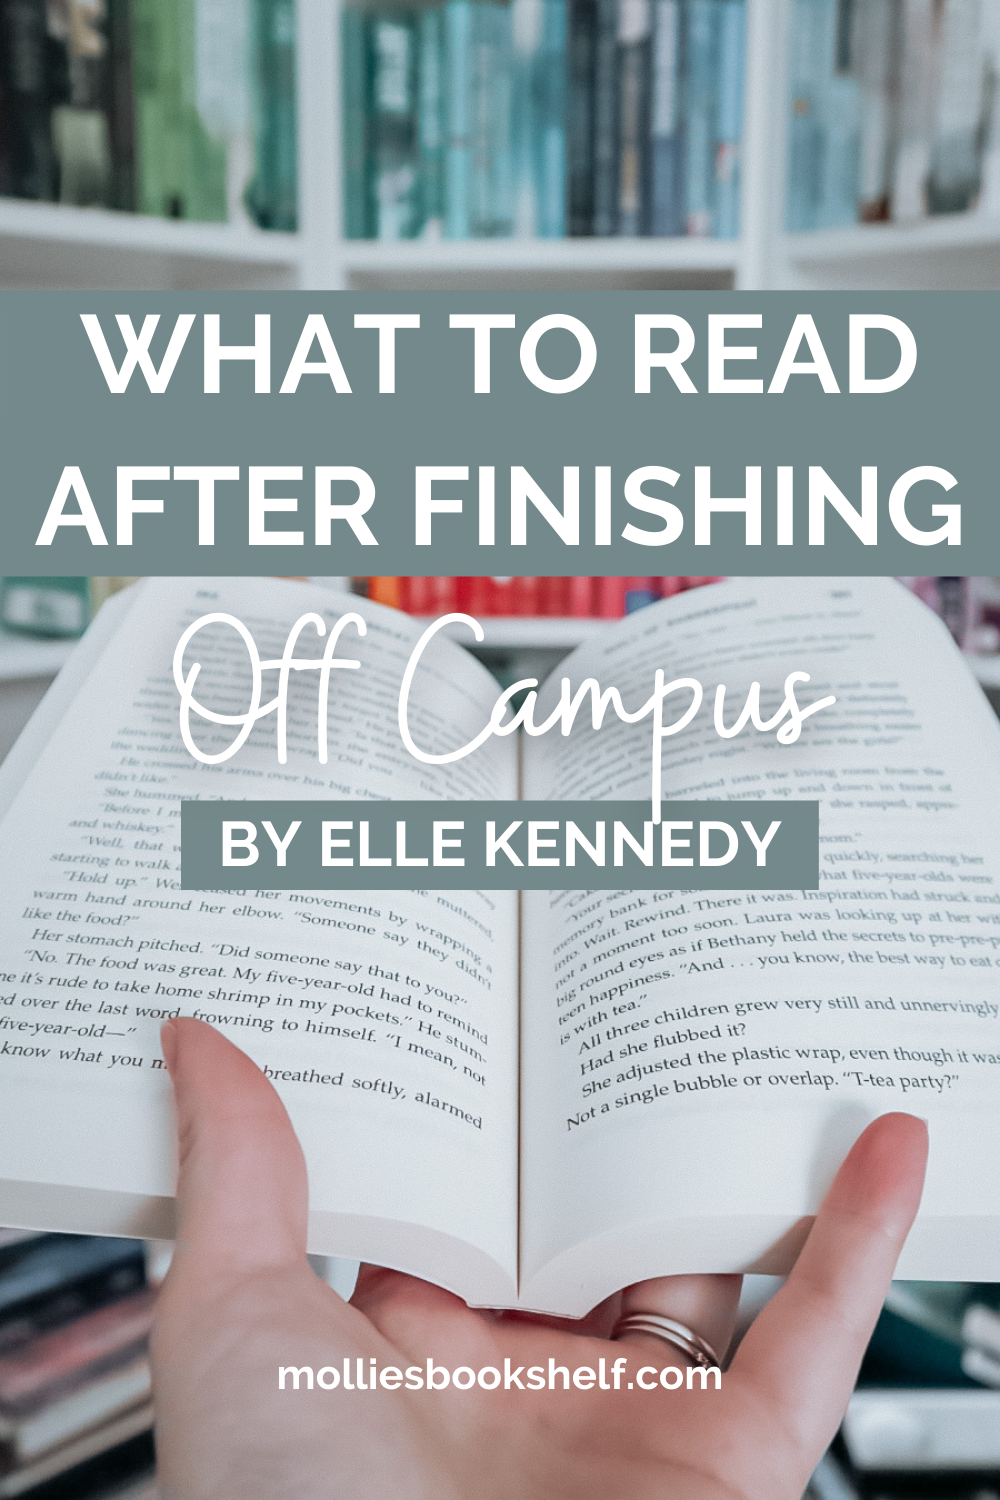 If You Liked Off-Campus by Elle Kennedy, Try These! — Mollie's Bookshelf